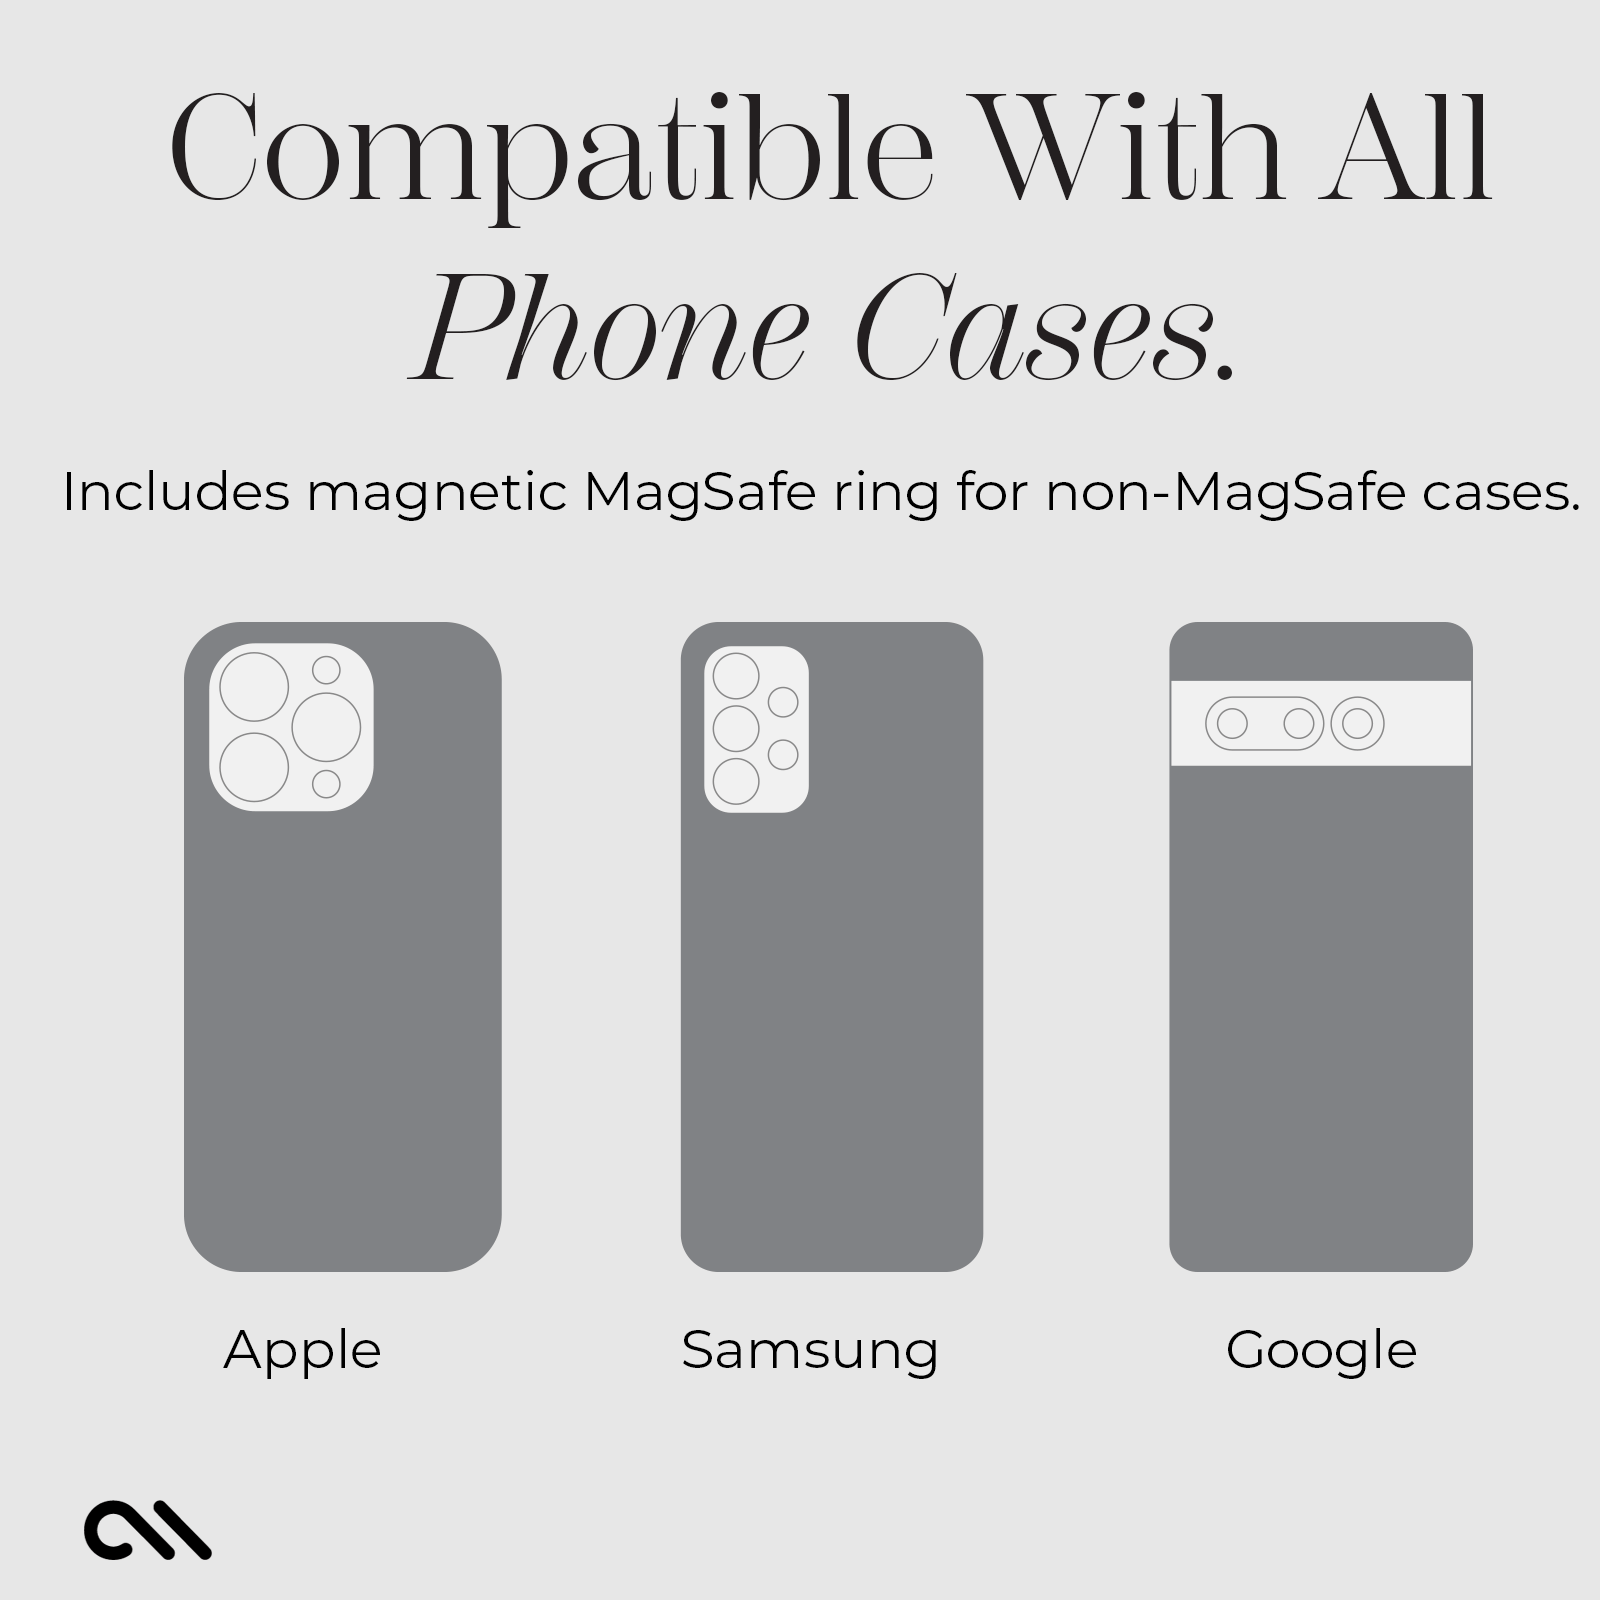 COMPATIBLE WITH ALL PHONE CASES. INCLUDES MAGNETIC MAGSAFE RING FOR NON MAGSAFE CASES